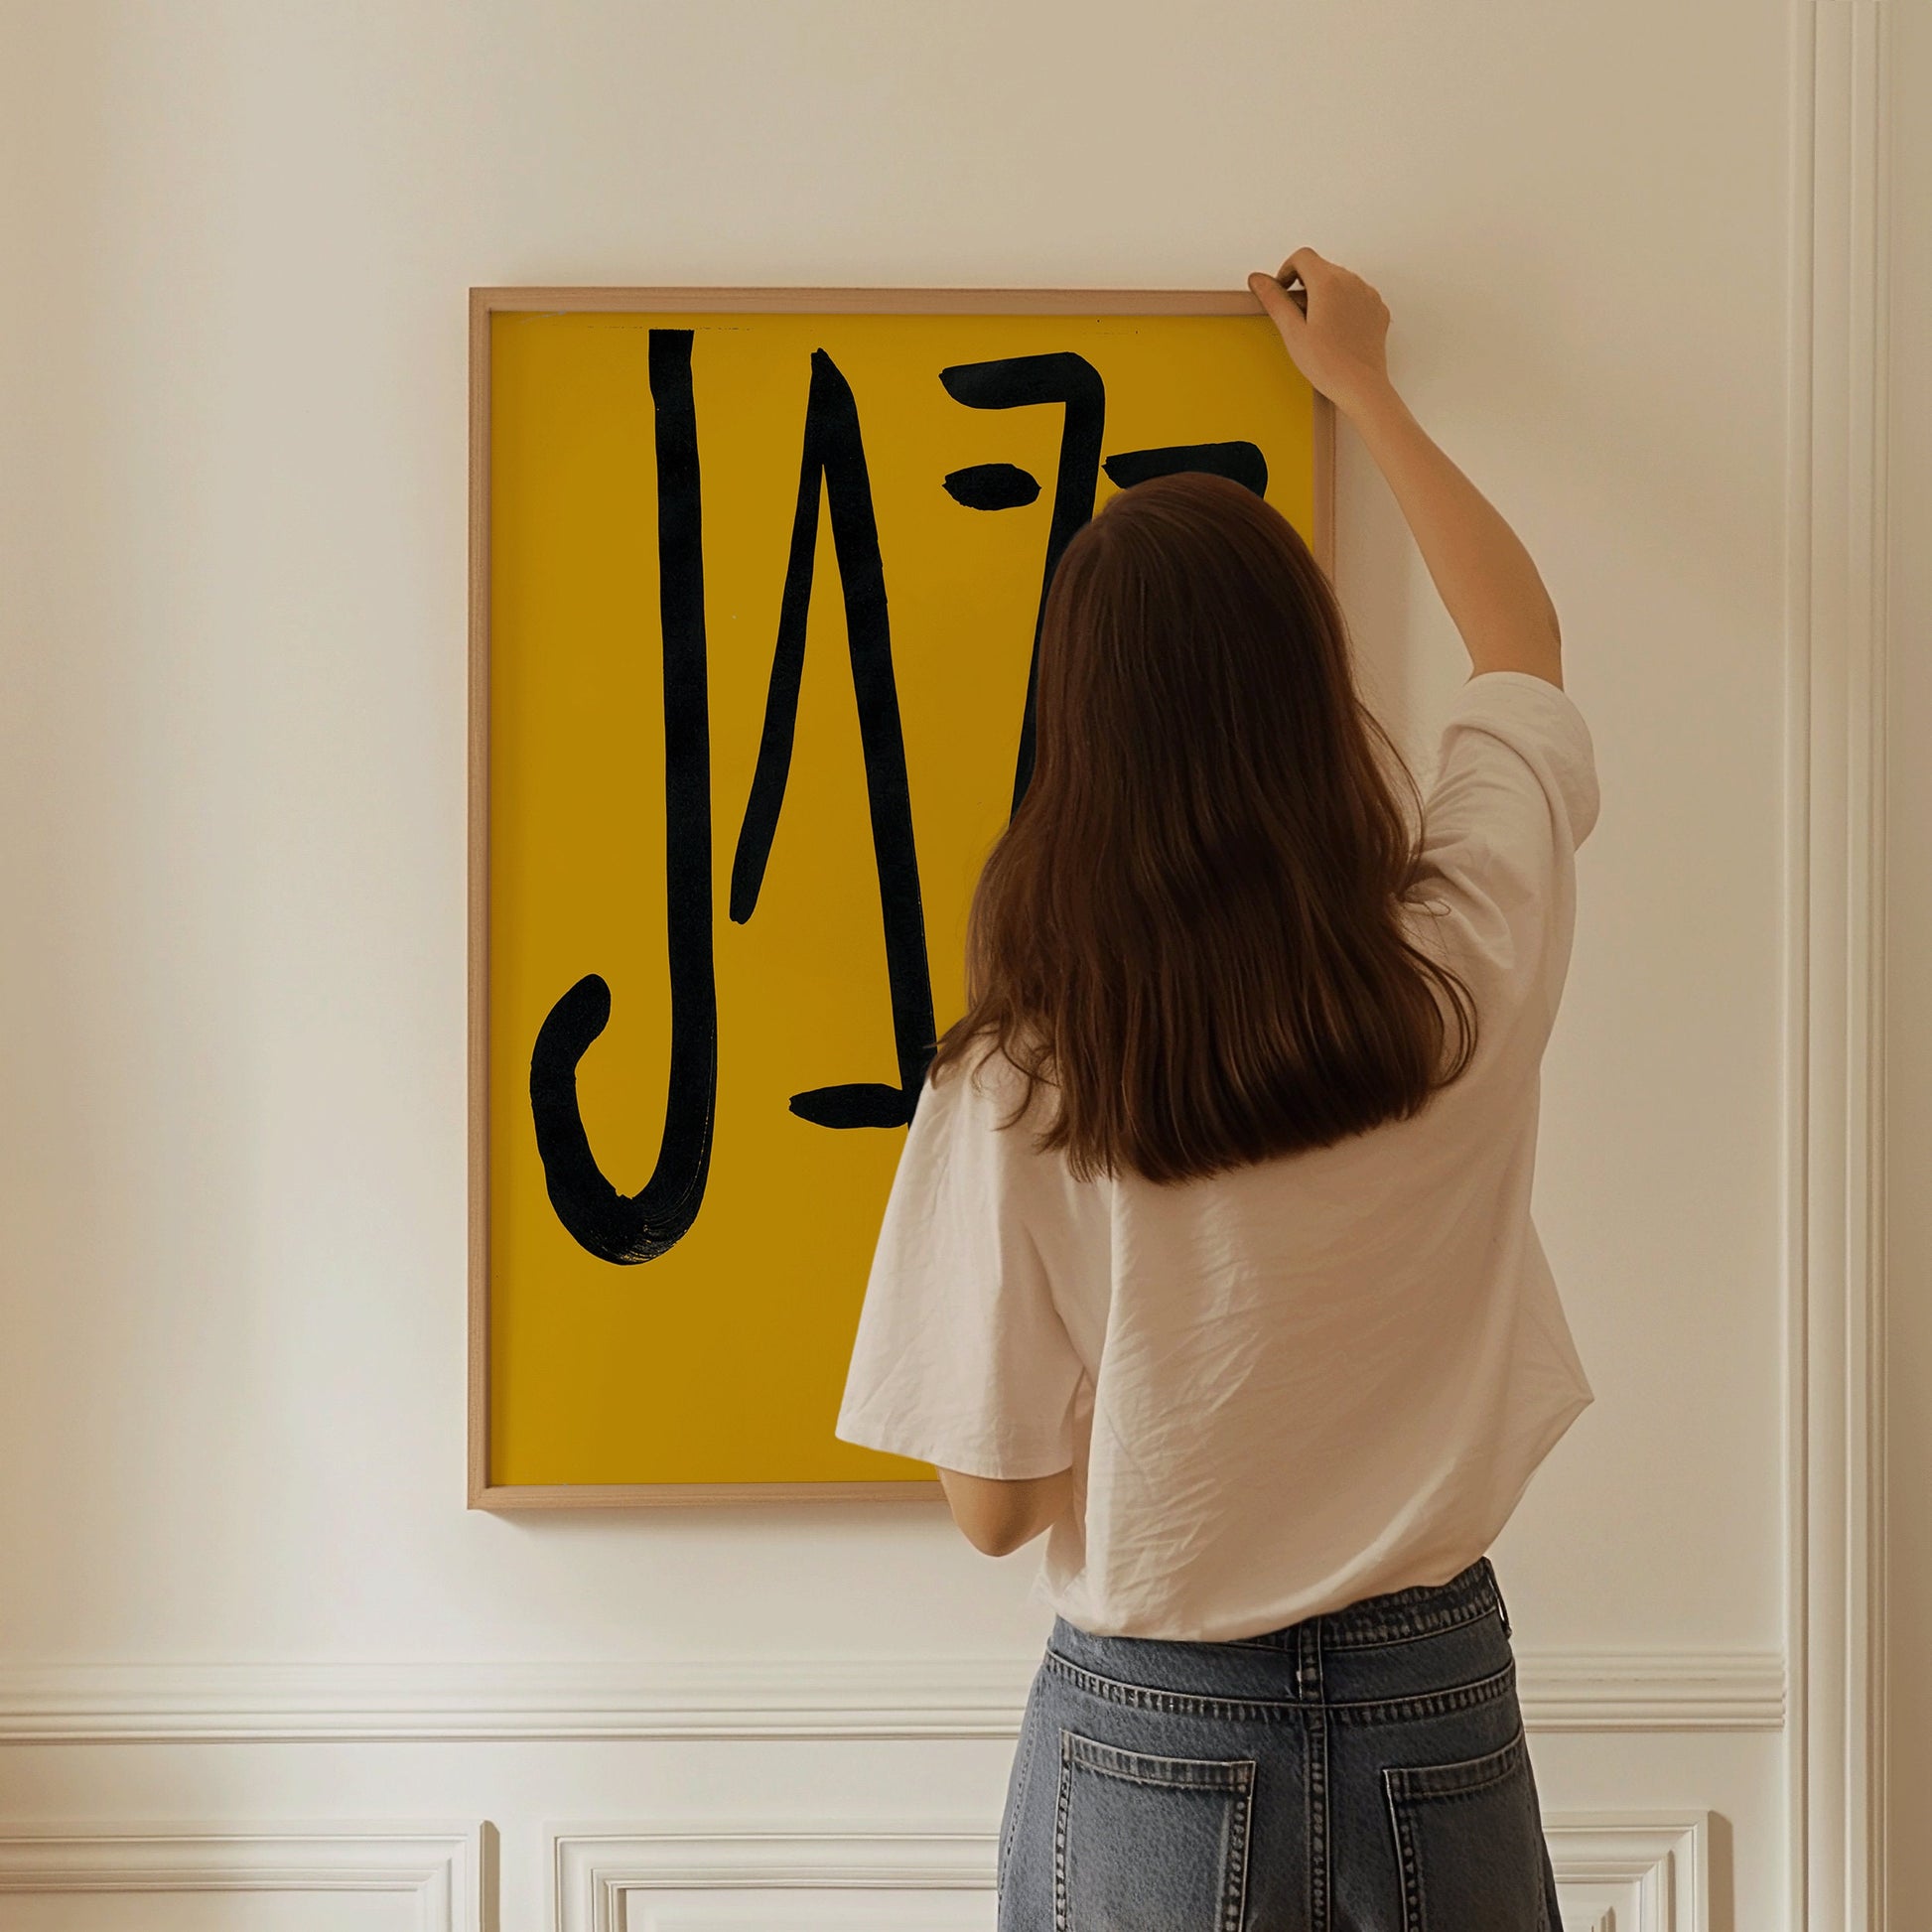 Henri Matisse - JAZZ (Mustard Yellow and Black) | Vintage Mid-Century Modern Typography Poster (available framed or unframed)